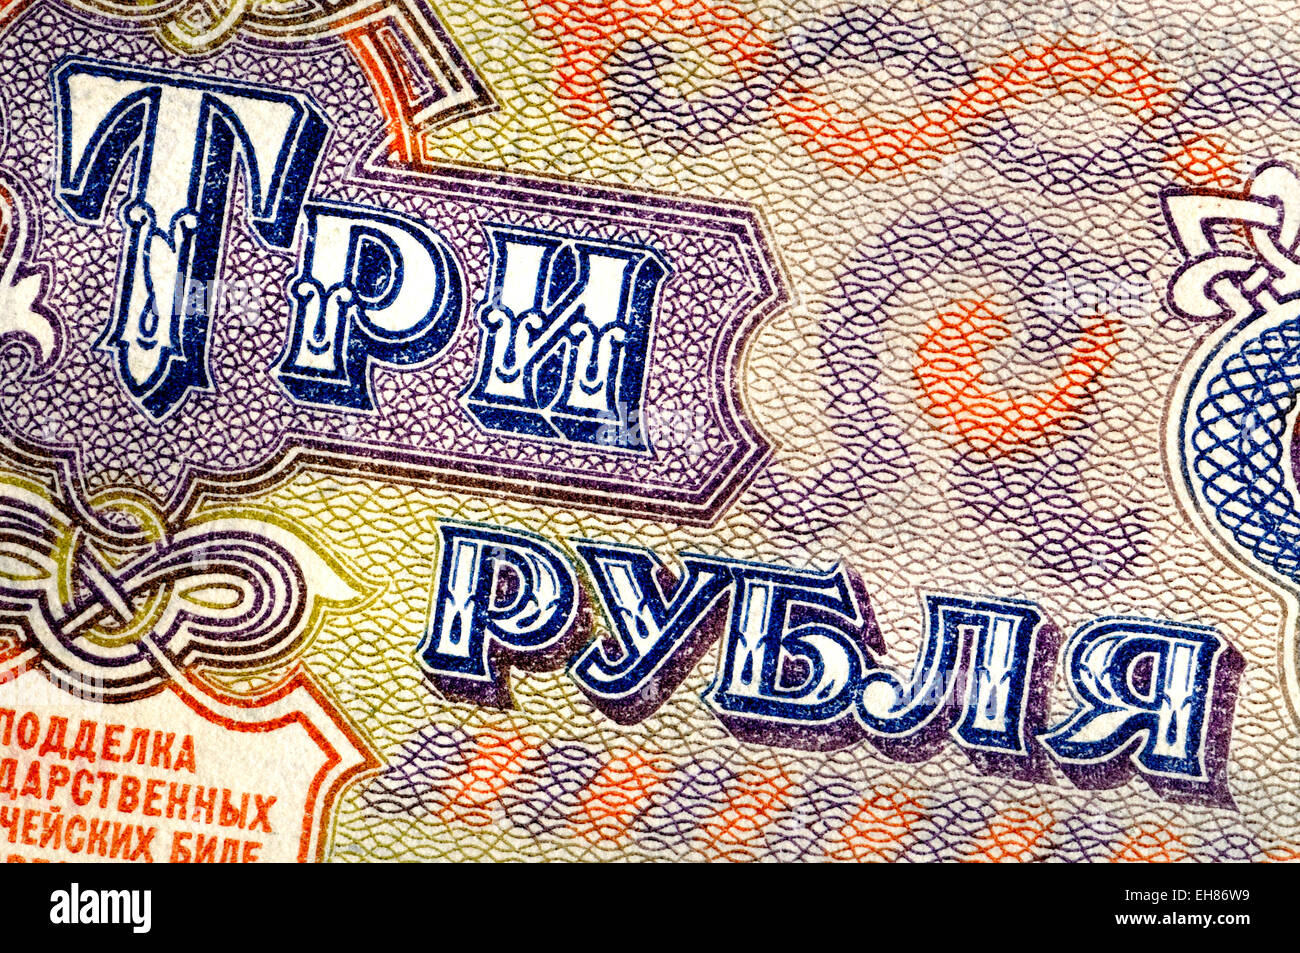 Detail from a 1991 Russain banknote showing 'three roubles' in Cyrillic script Stock Photo